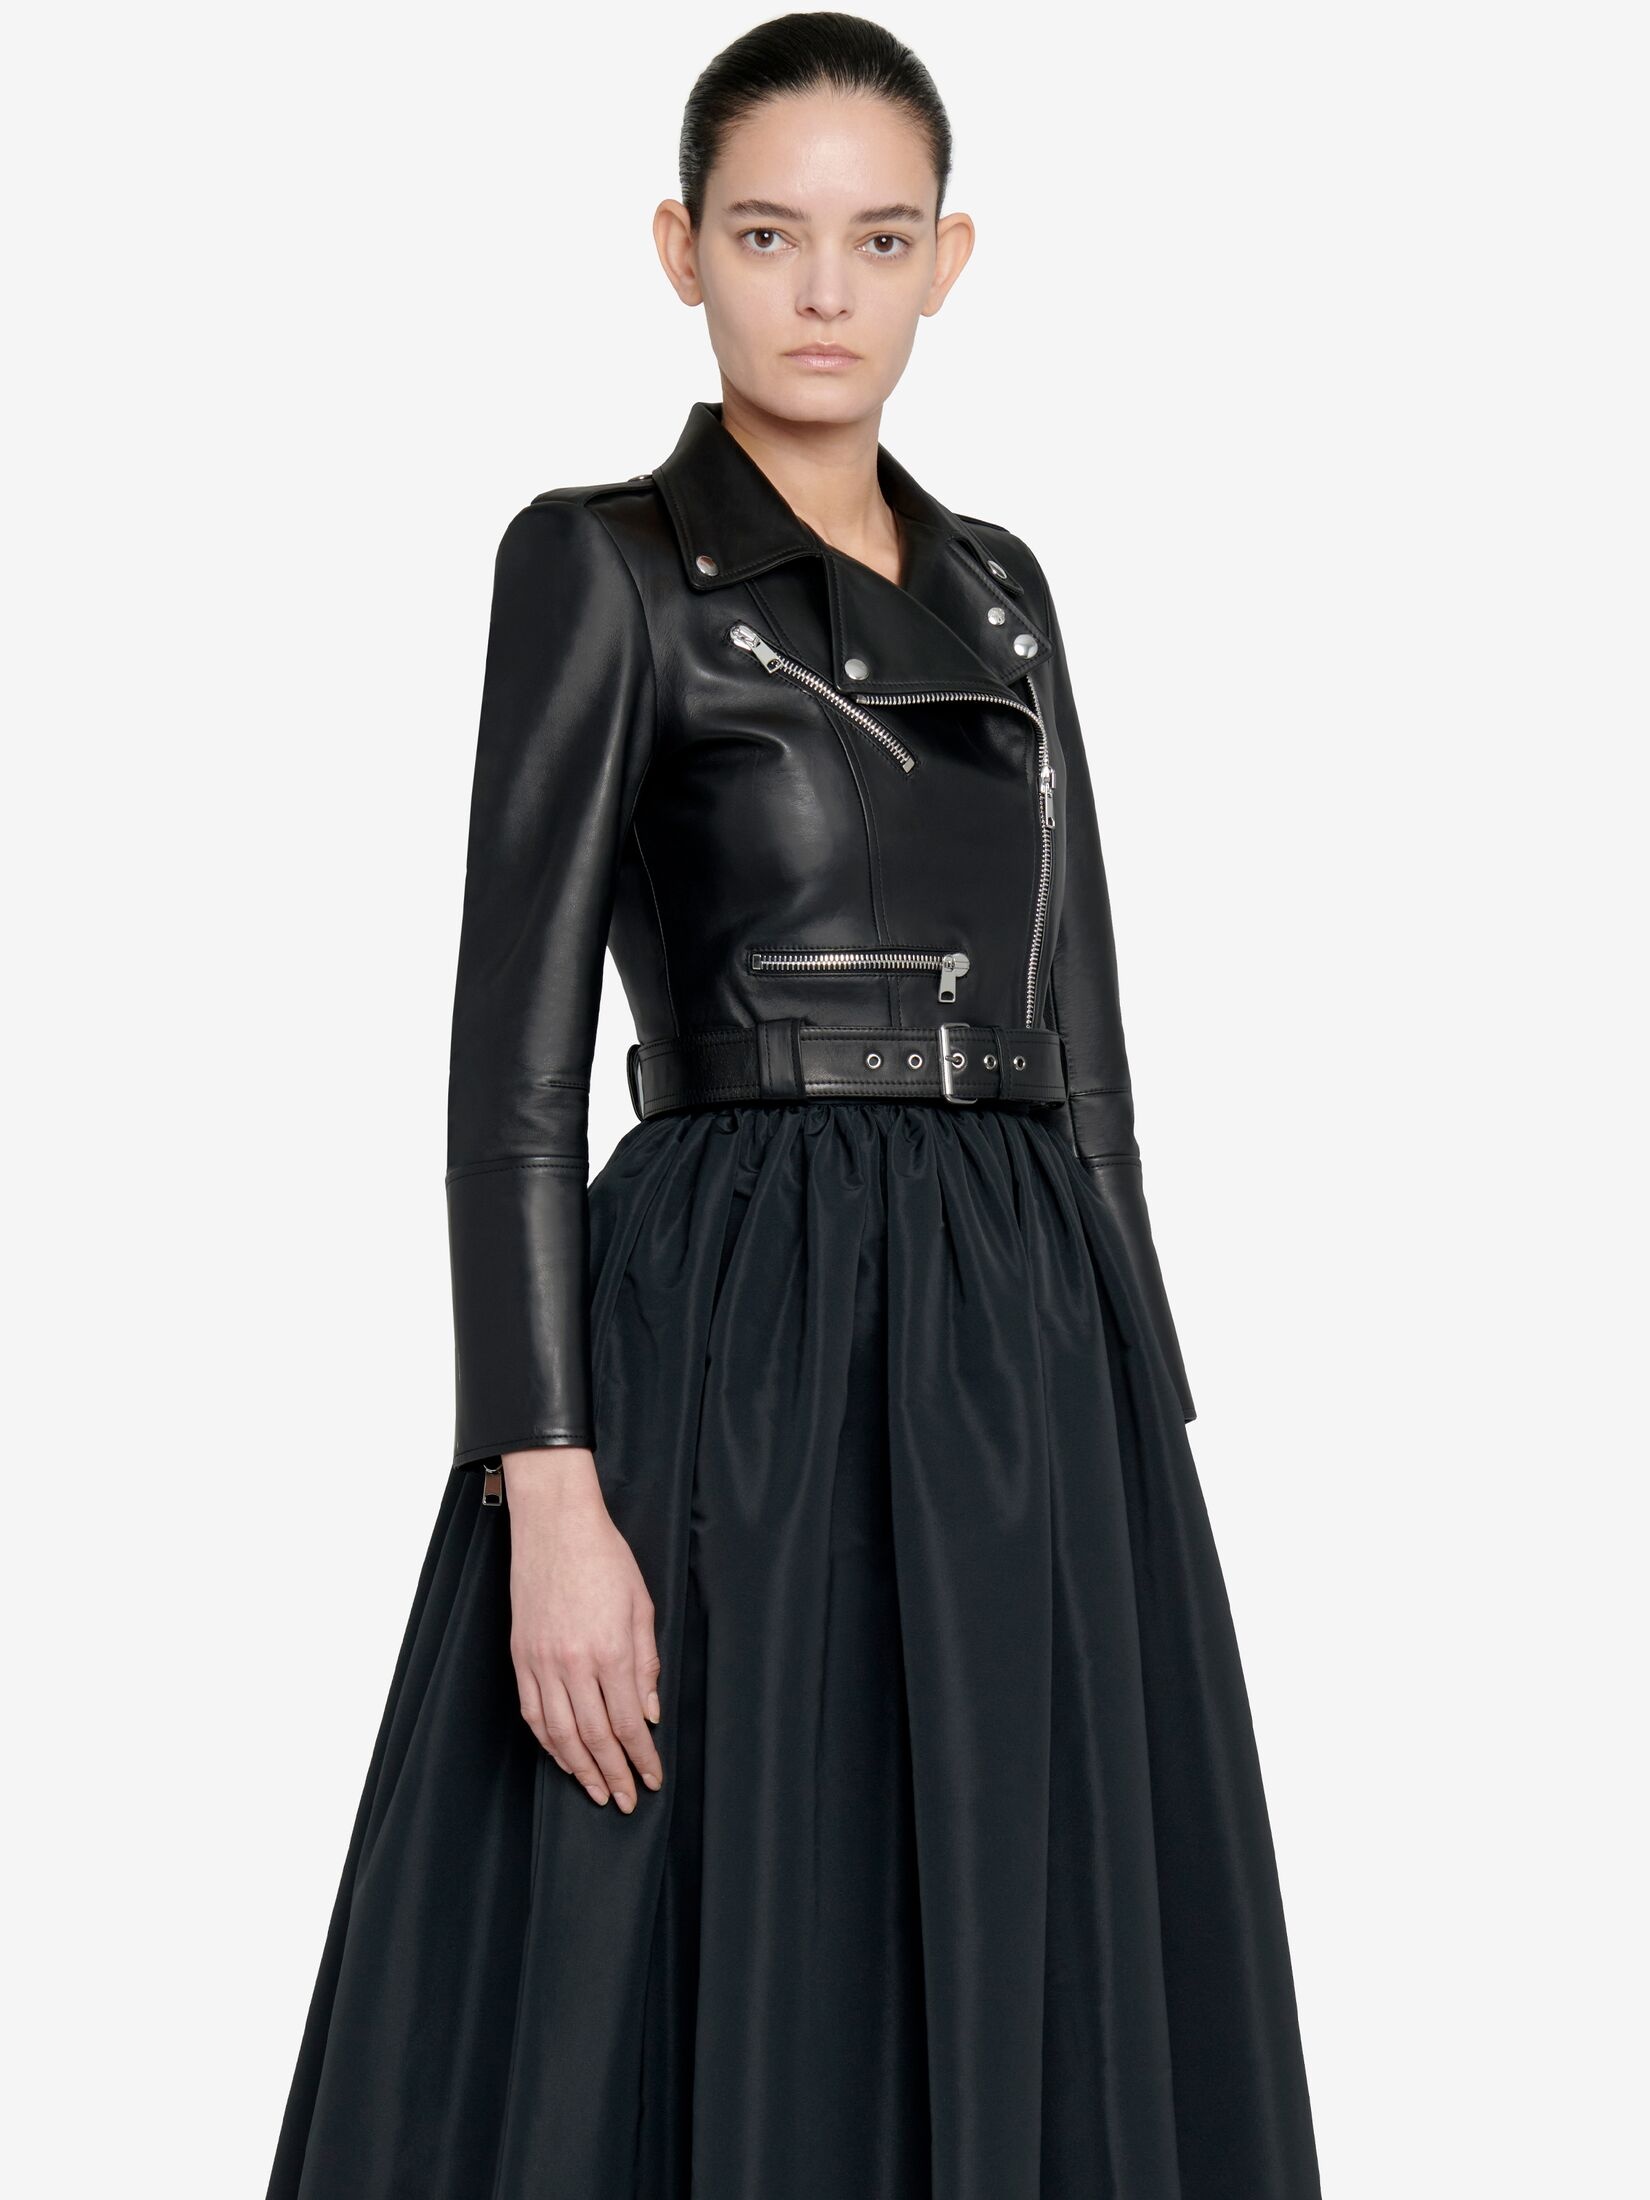 Women's Cropped Leather Jacket in Black - 5